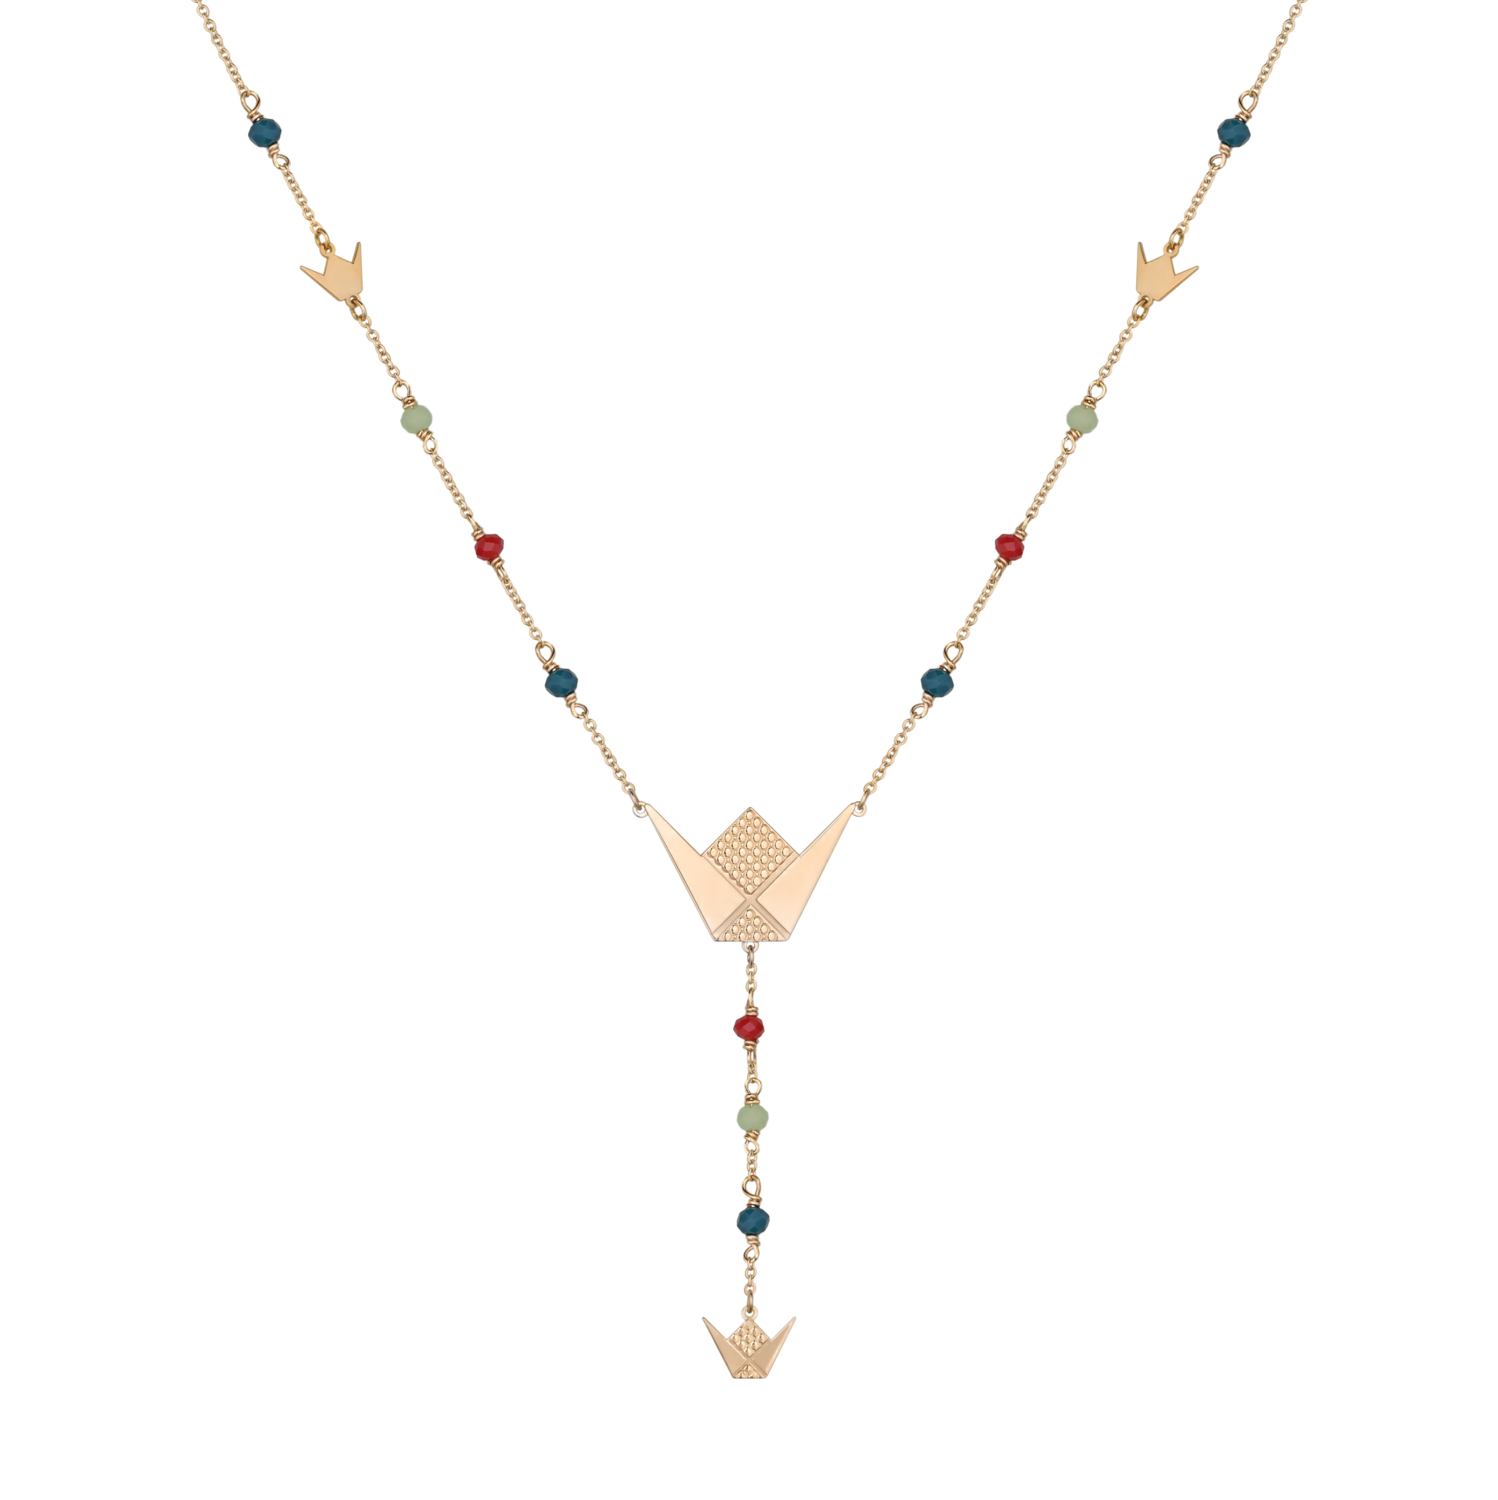 Emblem Gold Necklace with Colored Stones